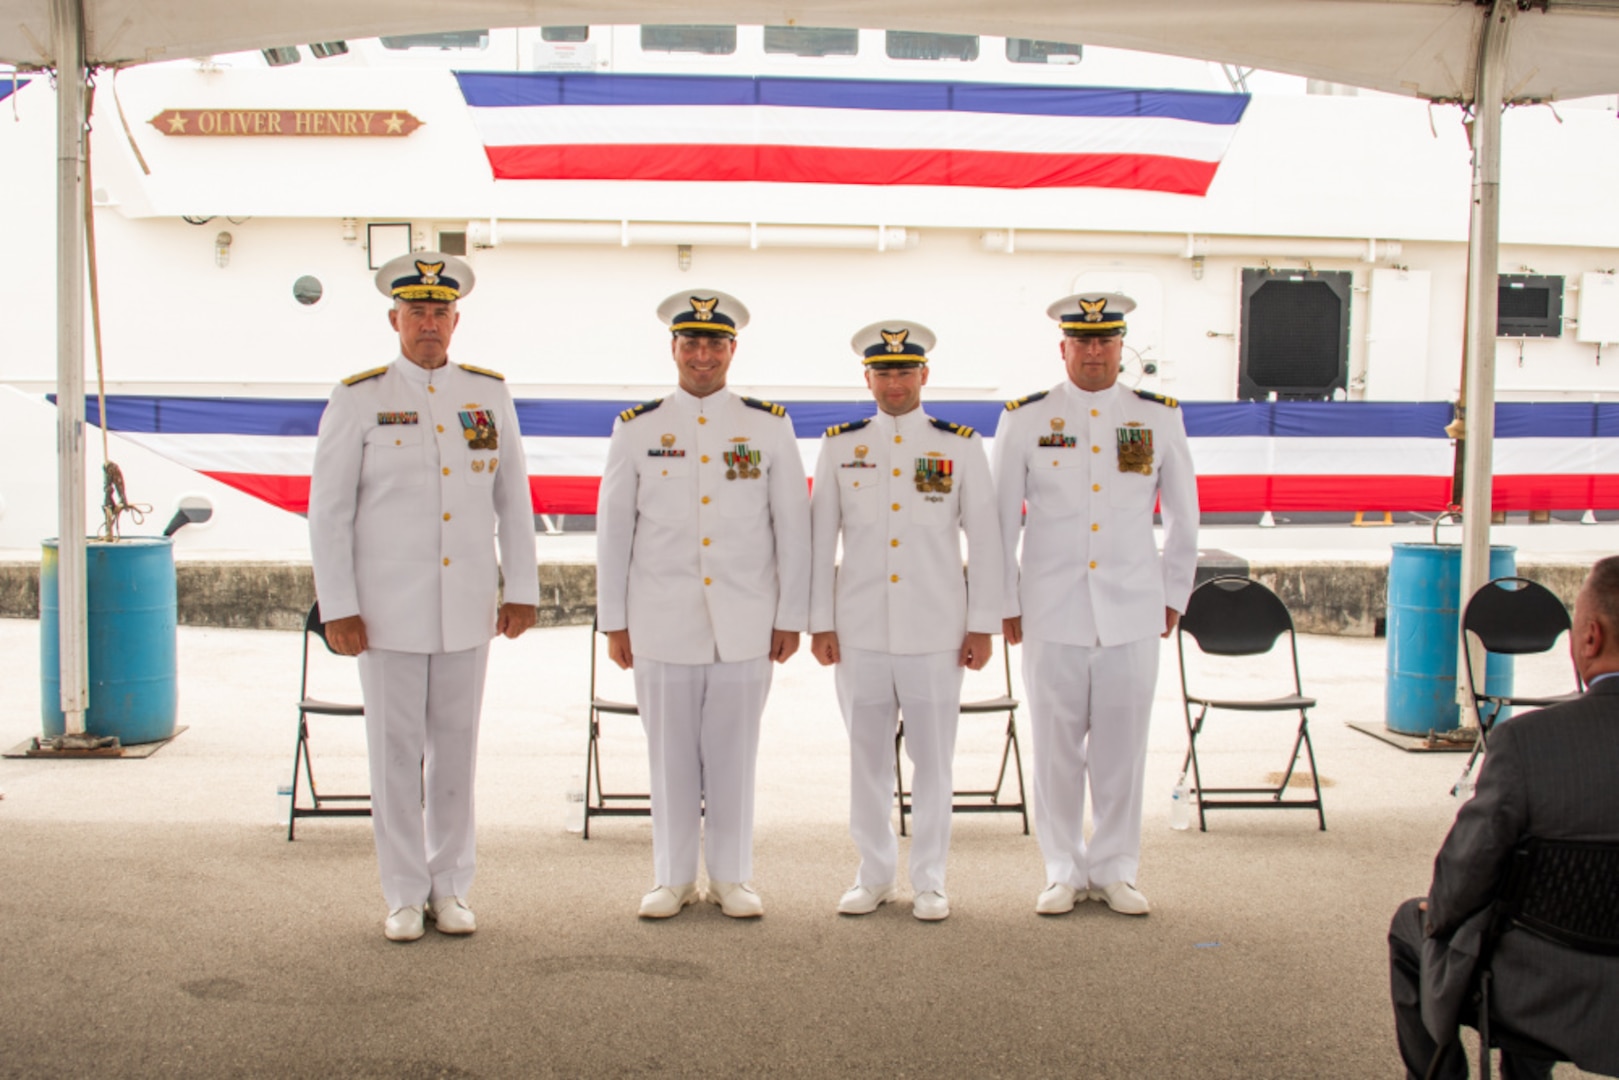 Adm. Karl Schultz, the commandant of the Coast Guard, stands with the commanding officers of three newly commissioned fast response cutters during a commissioning ceremony at Coast Guard Sector Guam July 29, 2021. During the ceremony, Coast Guard Cutters Myrtle Hazard, Oliver Henry and Fredrick Hatch were commissioned. (U.S. Coast Guard photo by Petty Officer 1st Class Travis Magee/Released)